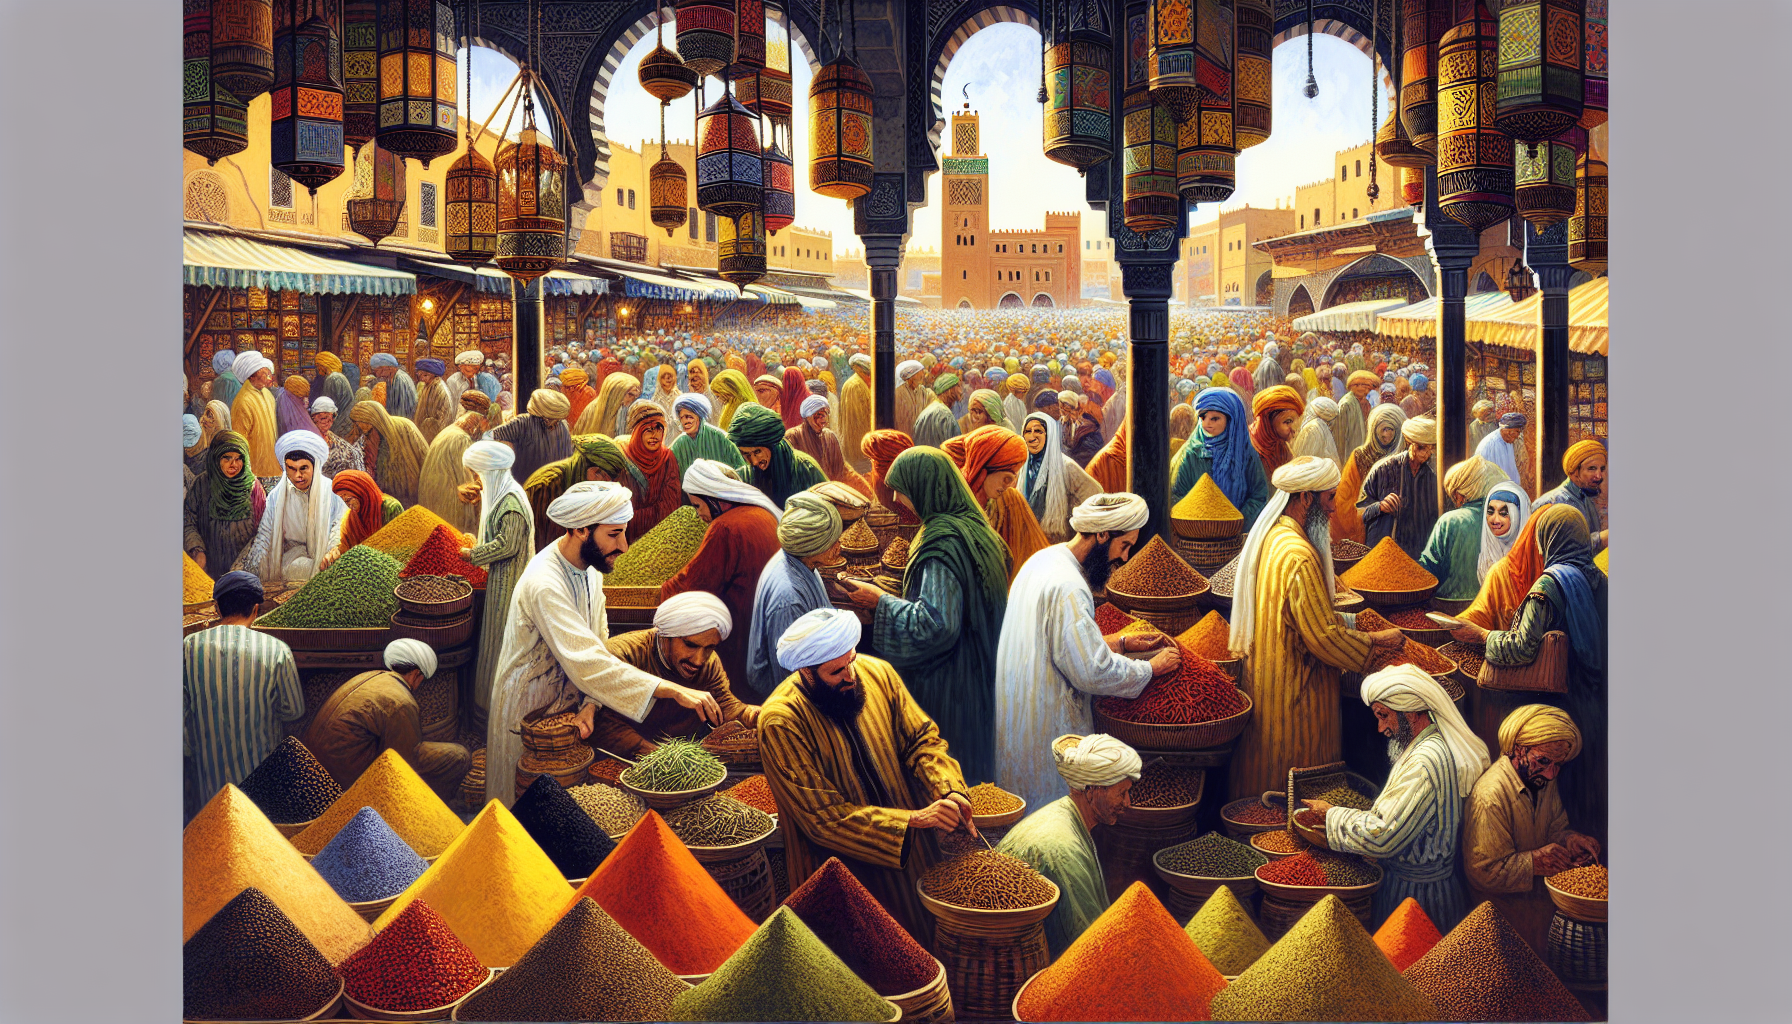 Illustration of traditional Moroccan market with various herbs and spices